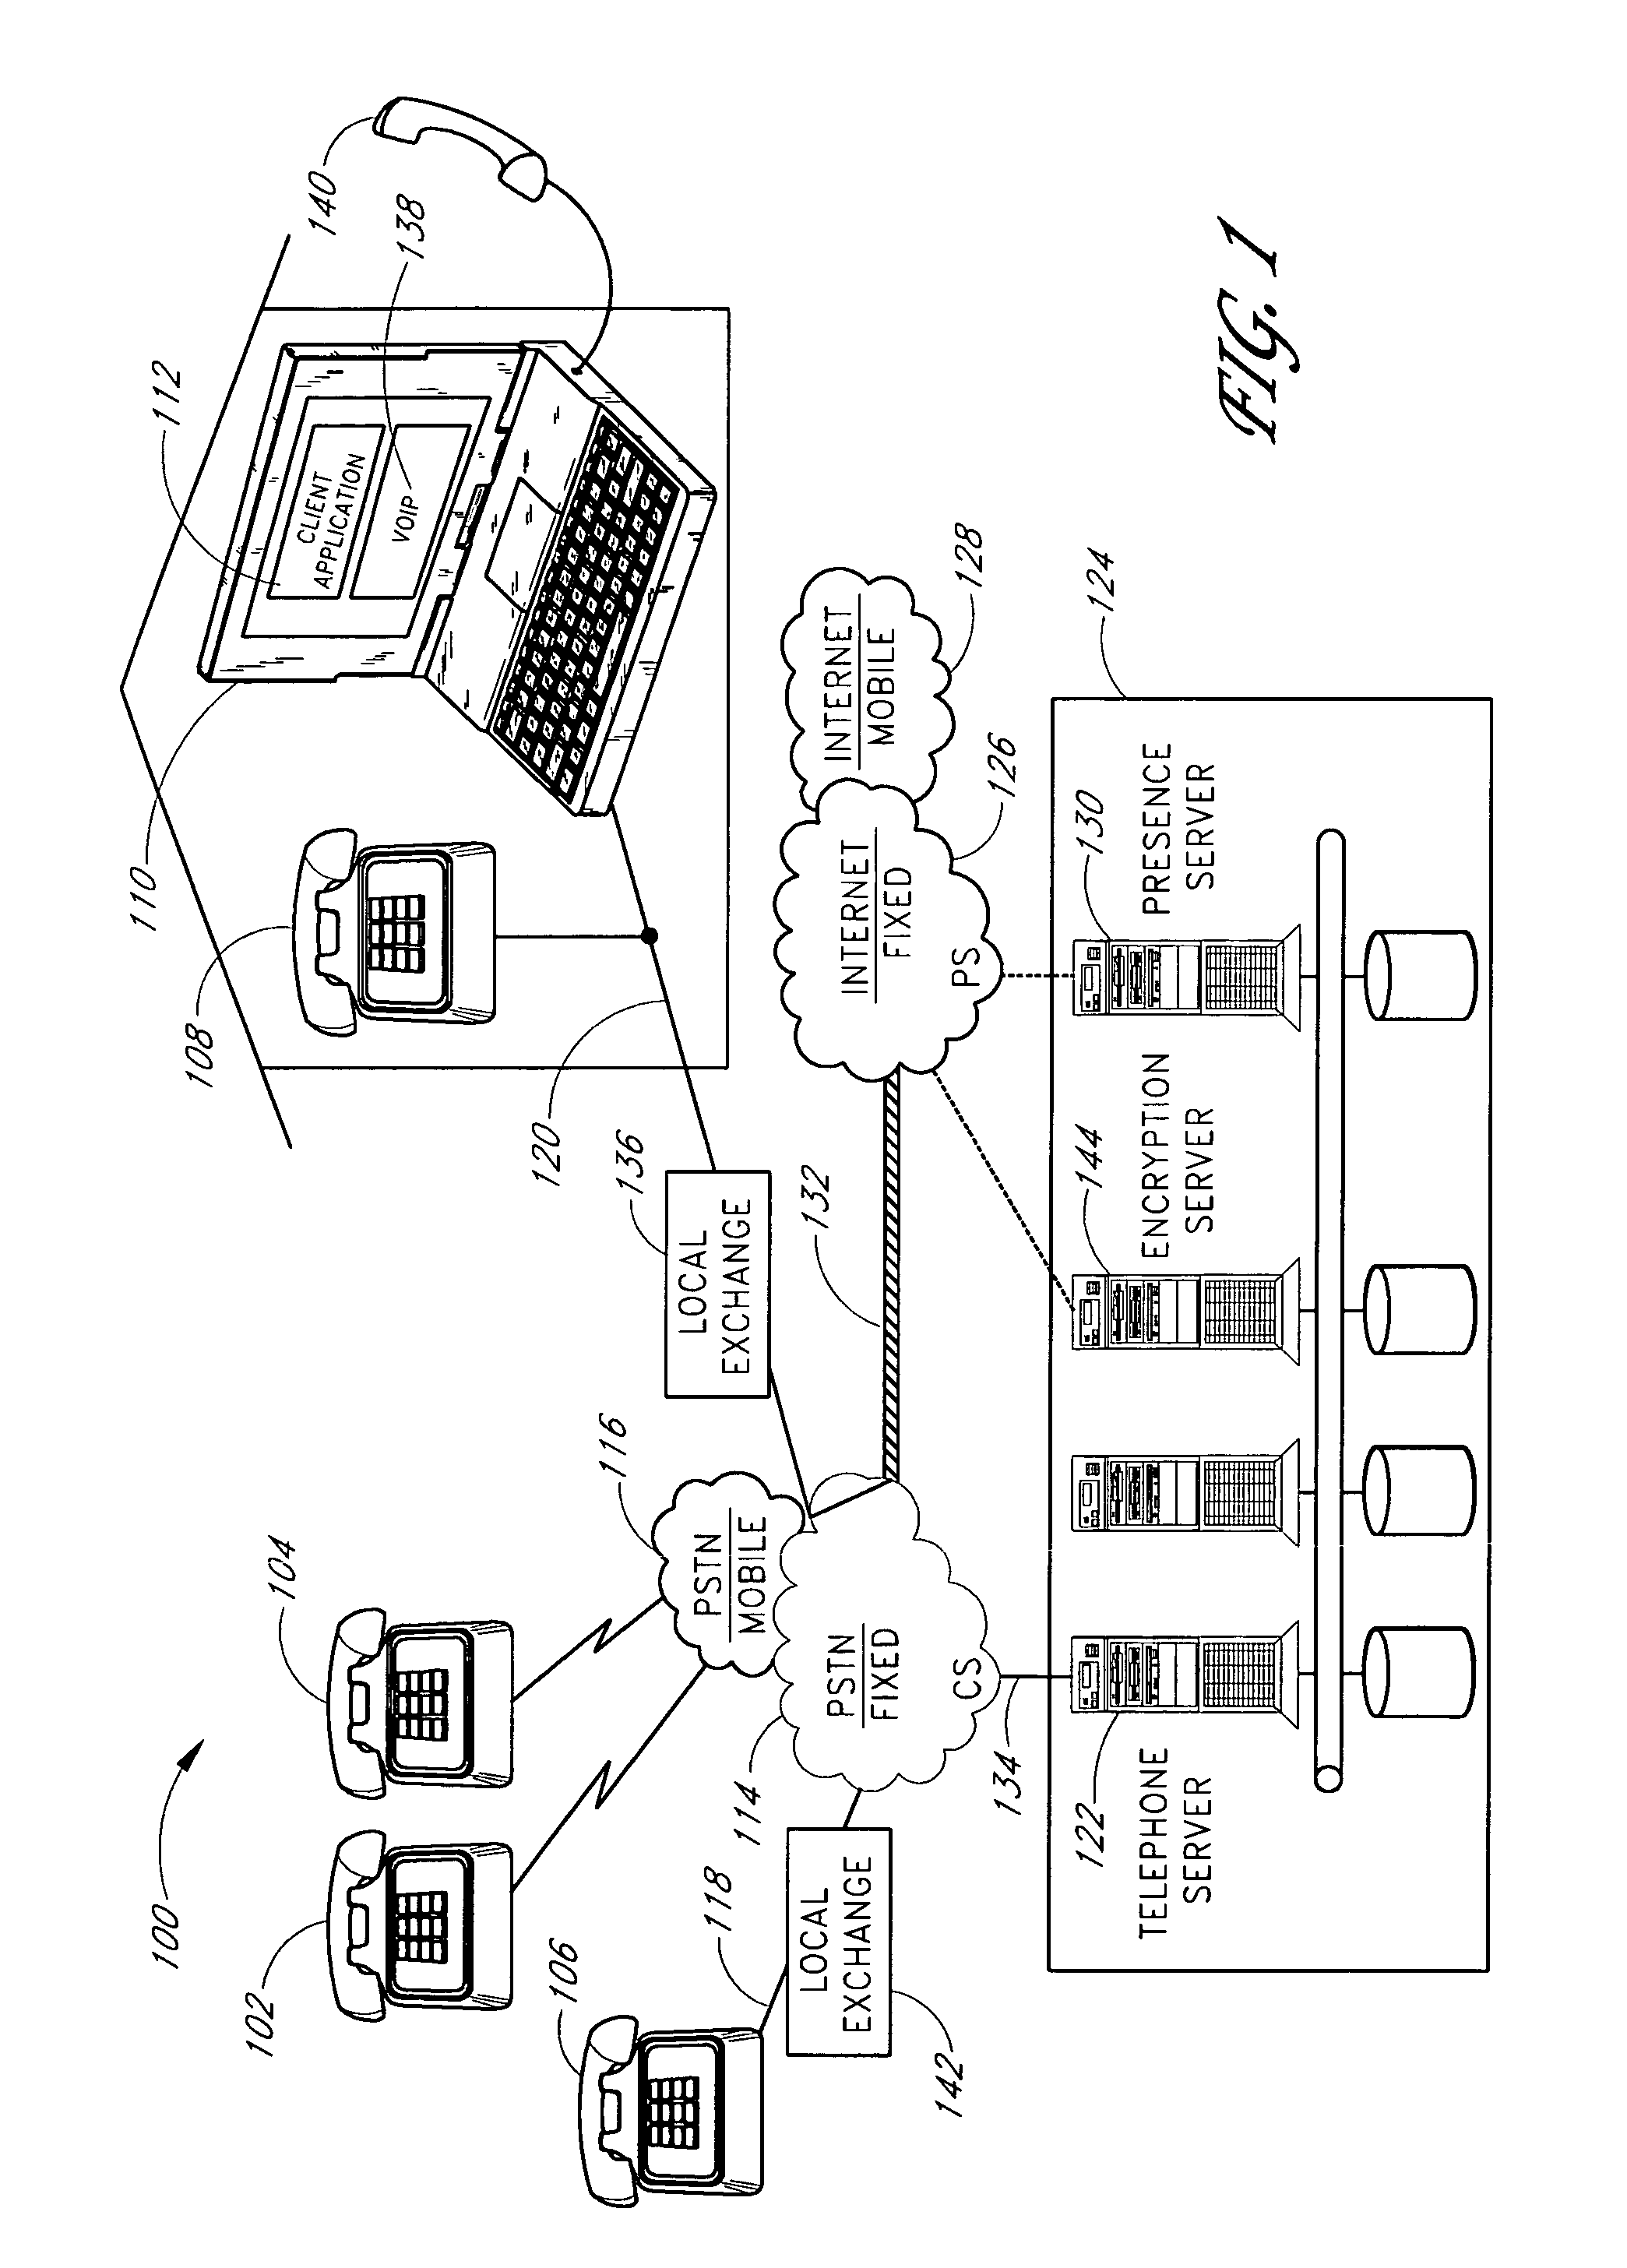 Methods and systems for creating a dynamic call log and contact records